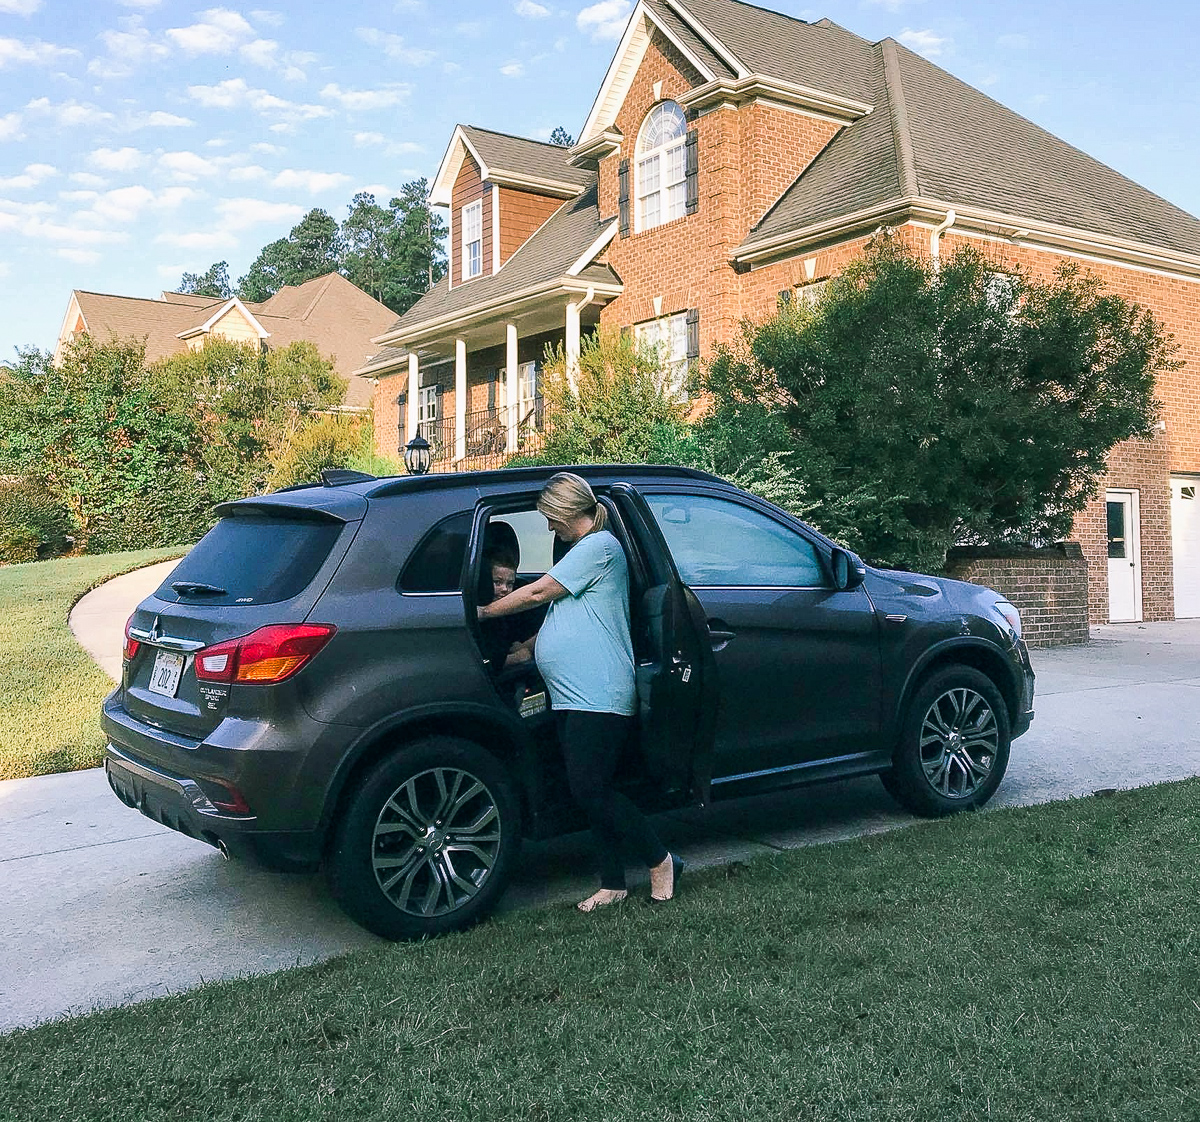 Pumpkin Patch, Festival, Scenic Fall Drives - Fall Bucket List with Mitsubishi Outlander Sport and @frostedevents Misty Nelson